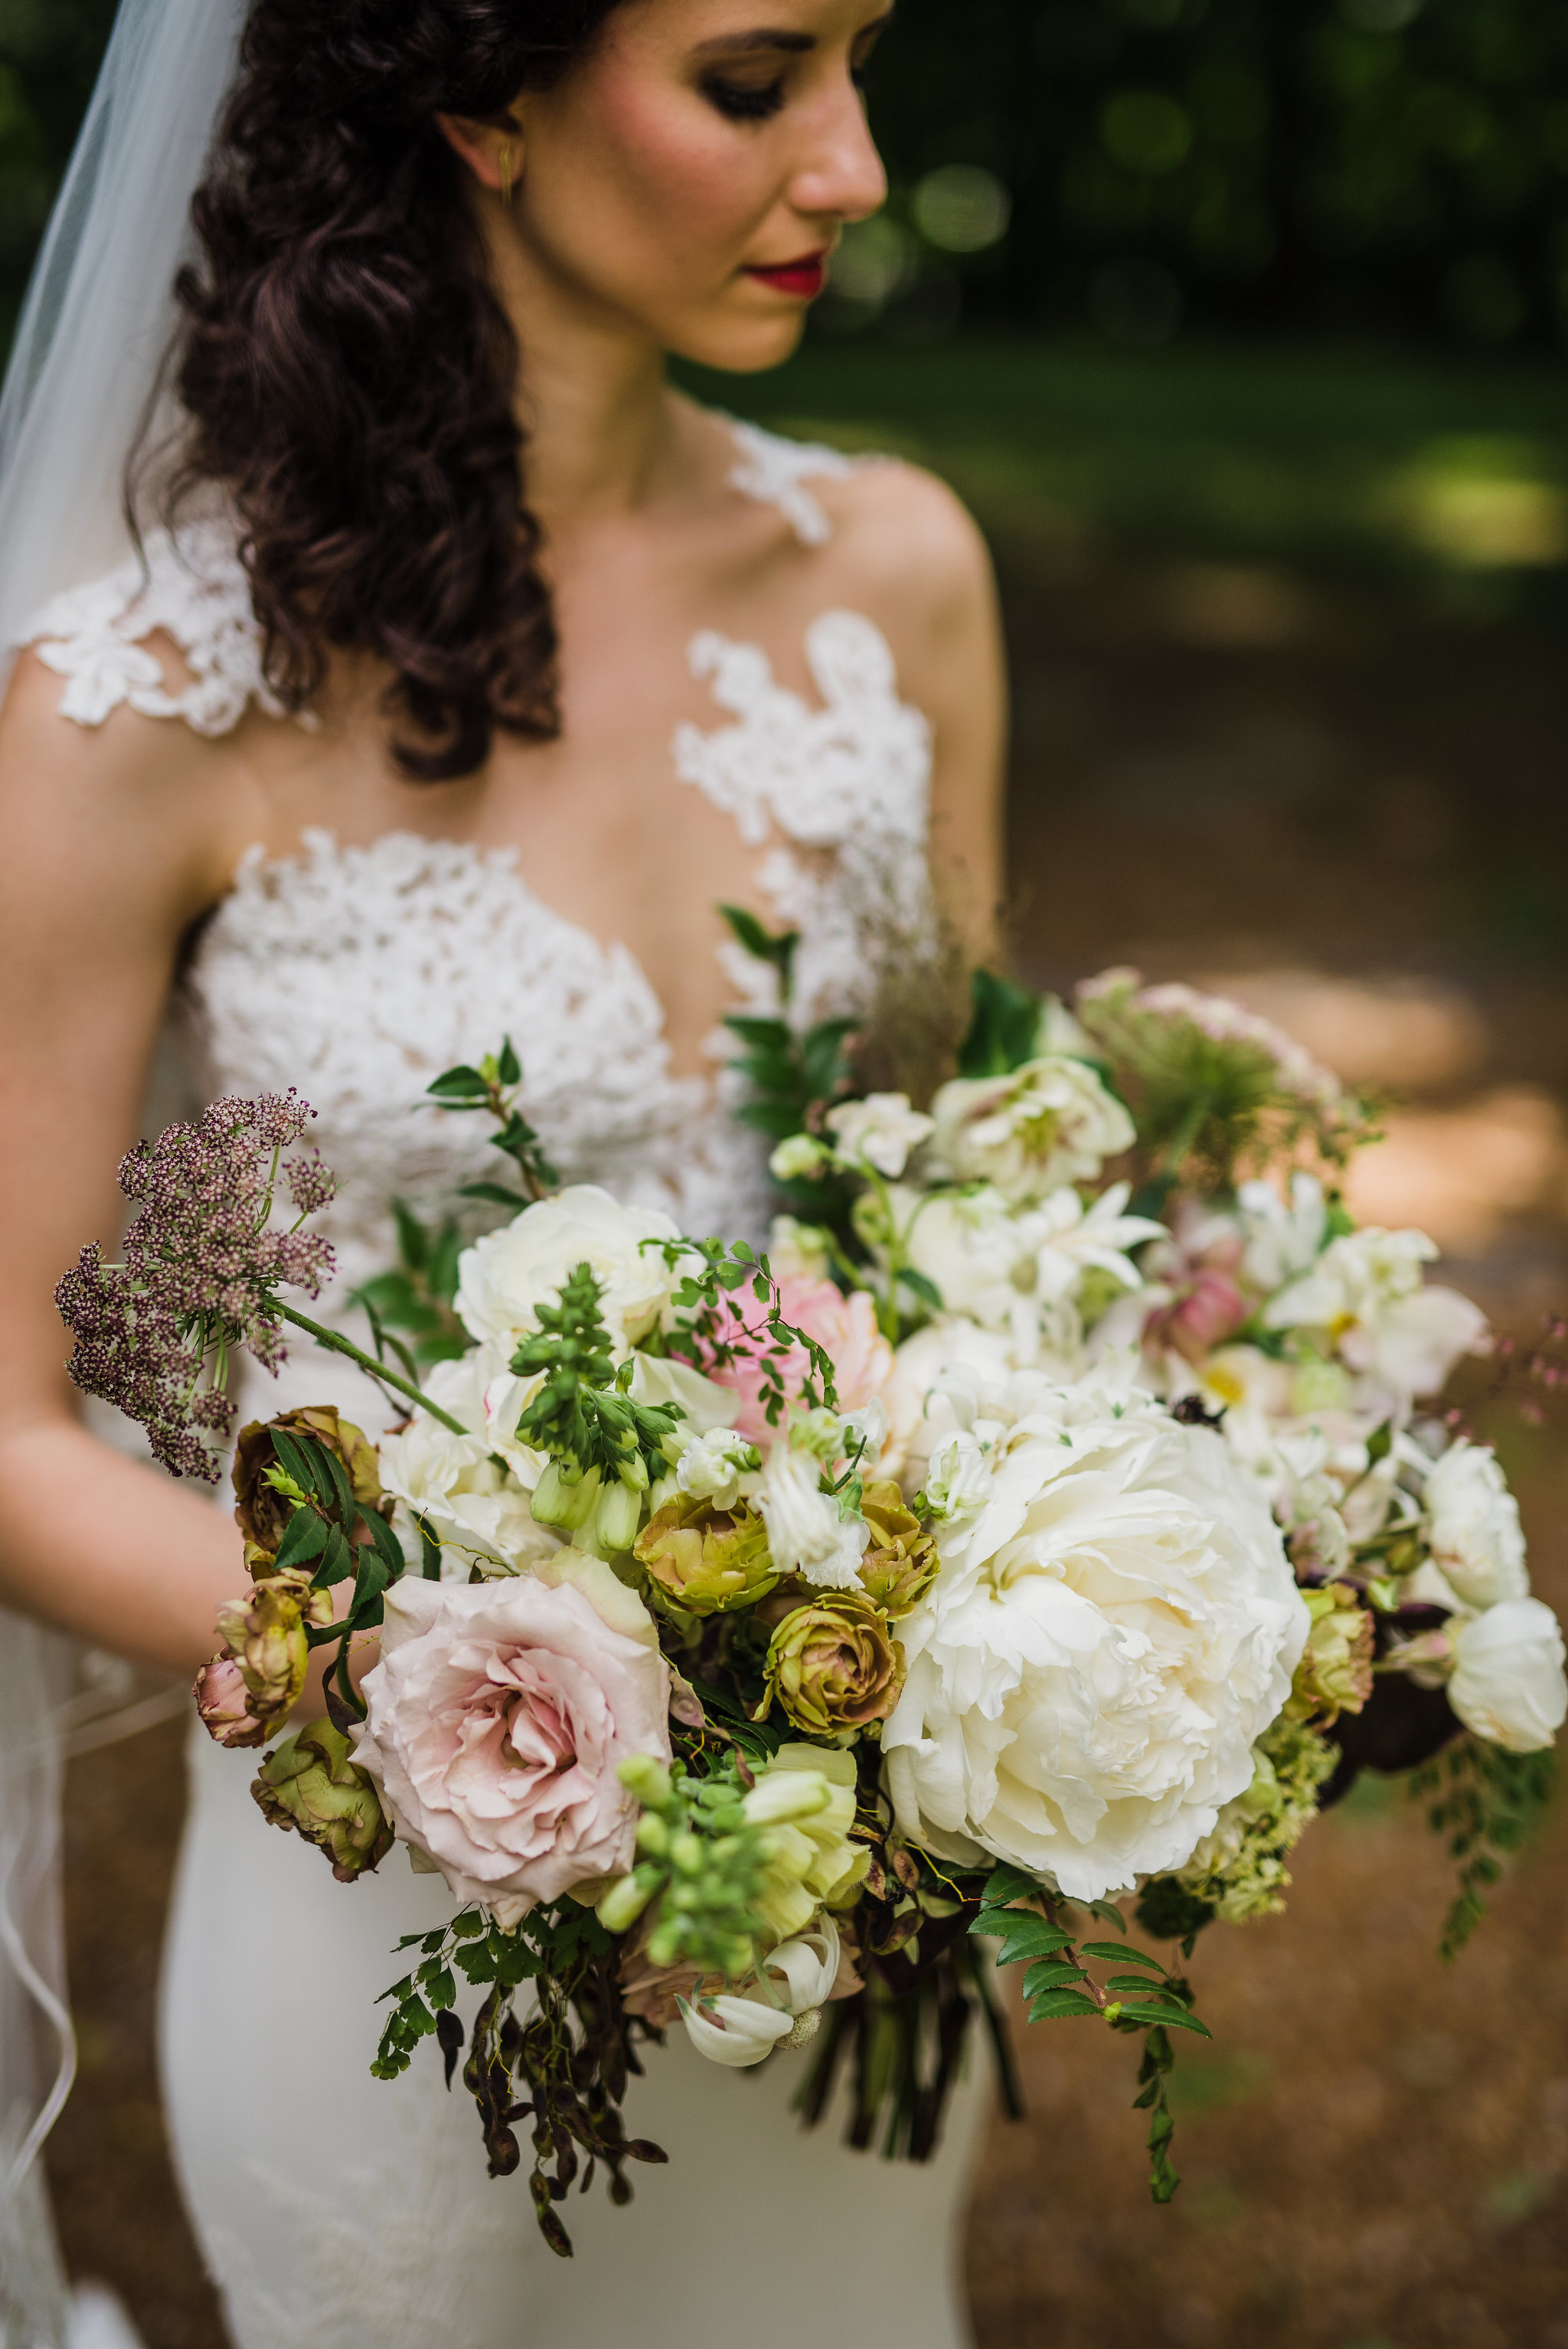 Organic, natural bridal bouquet with peonies, laceflower, greenery and neutral colors // Nashville Wedding Floral Design